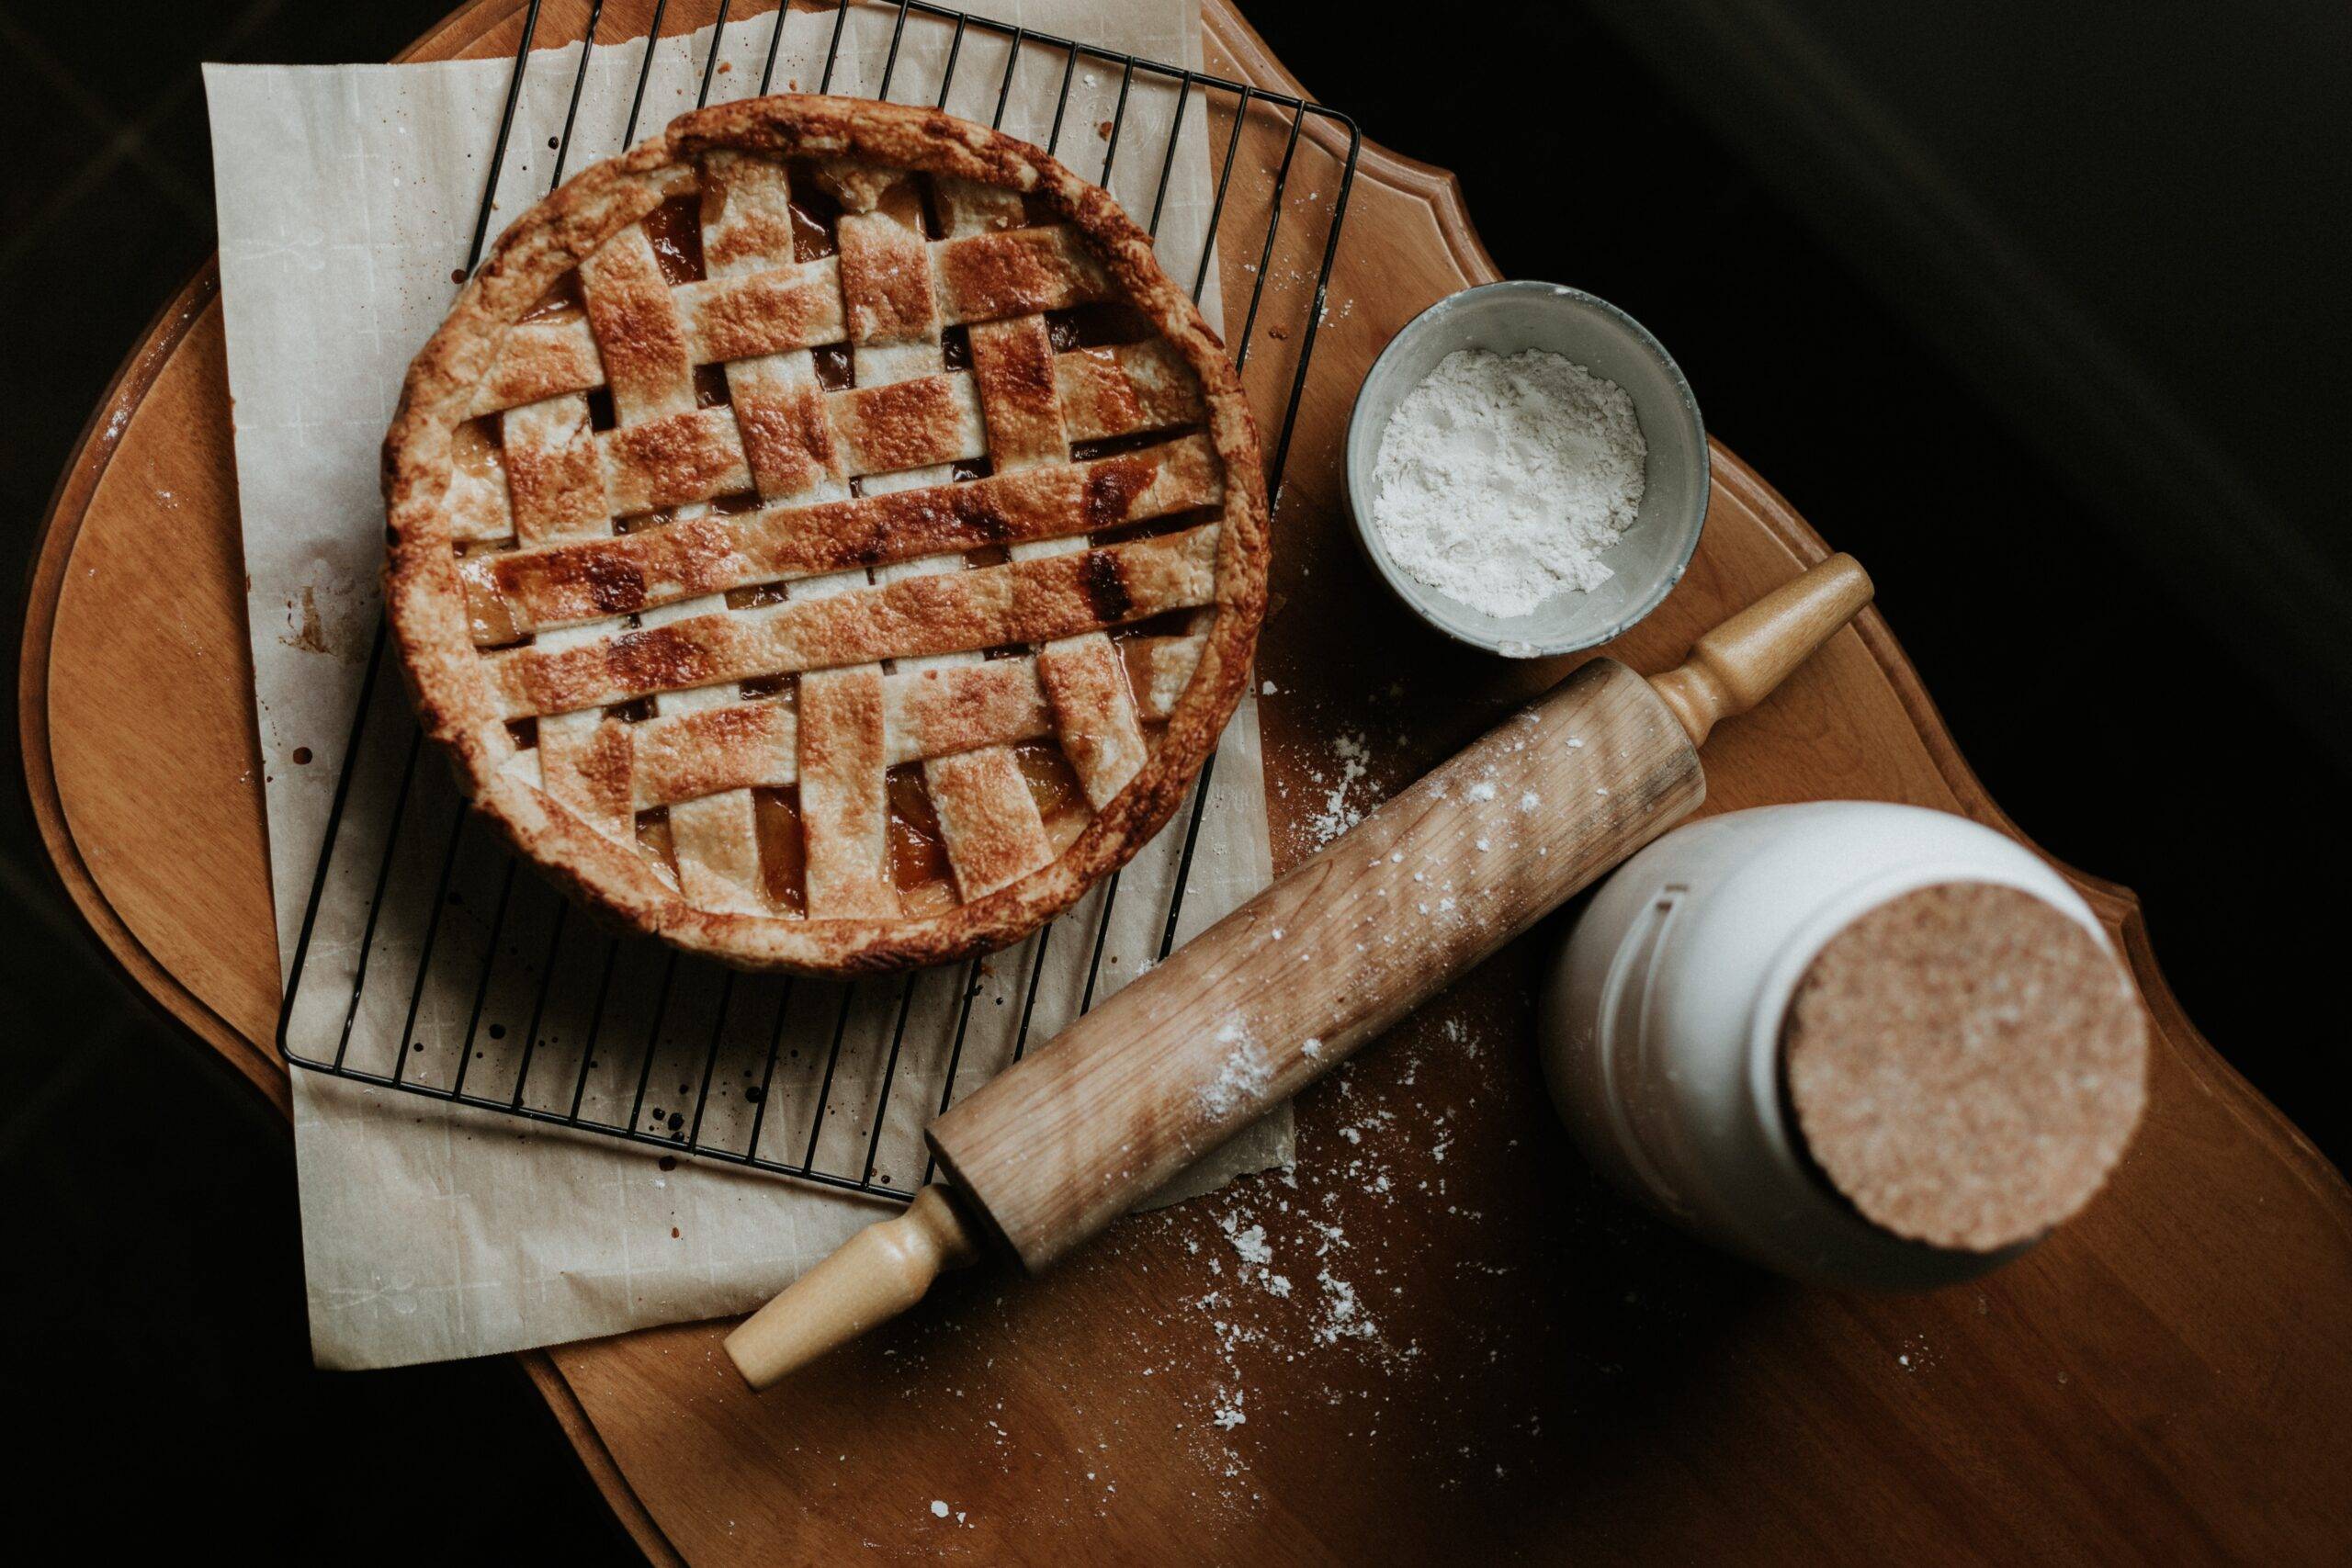 The Best Beginner’s Guide: 7 Tips for Perfect Pie Baking